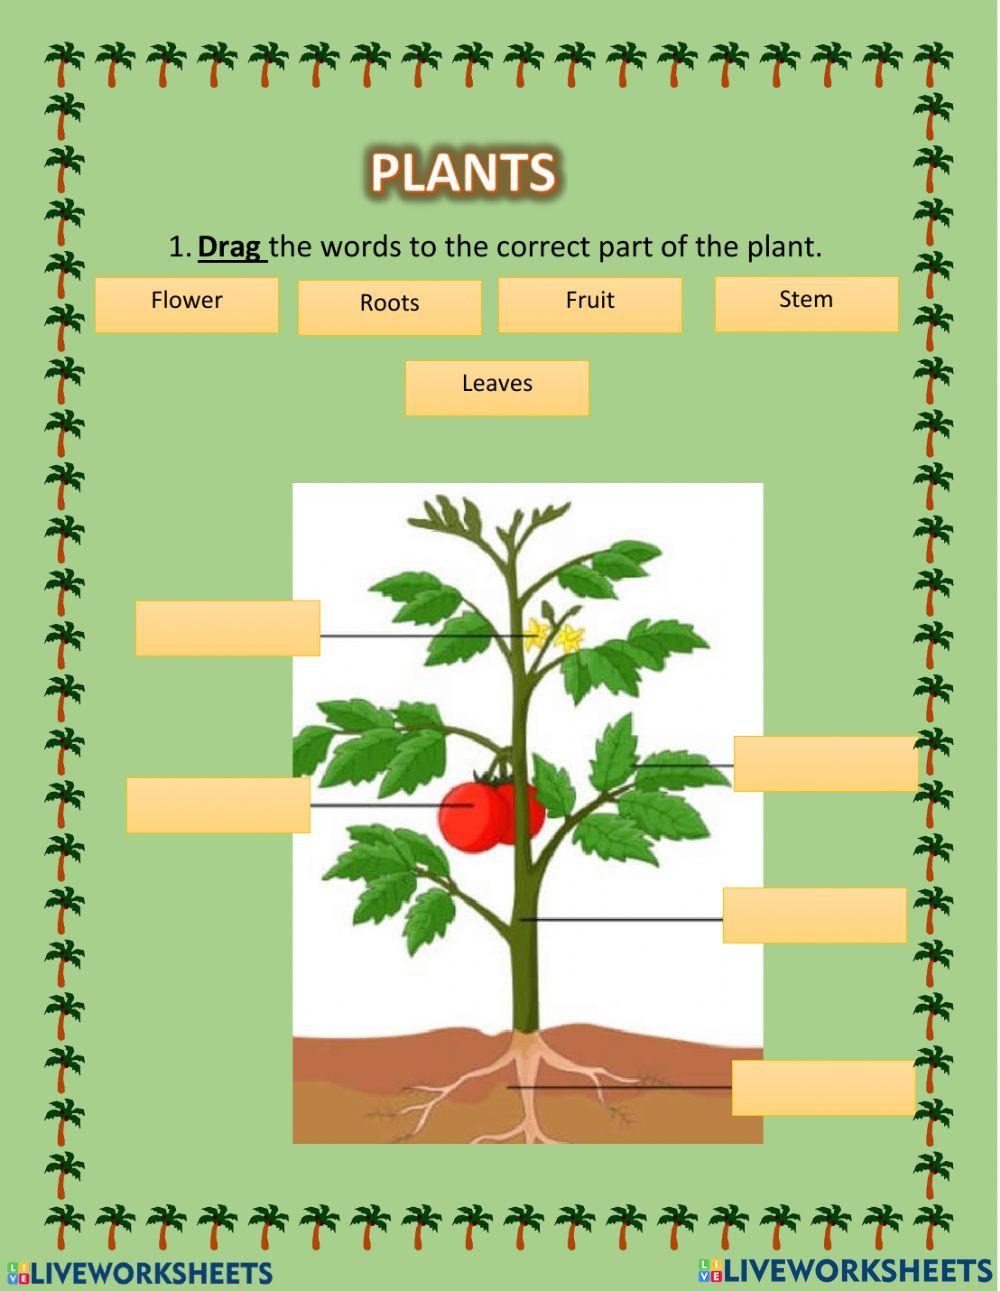 Parts of a plant and its functions